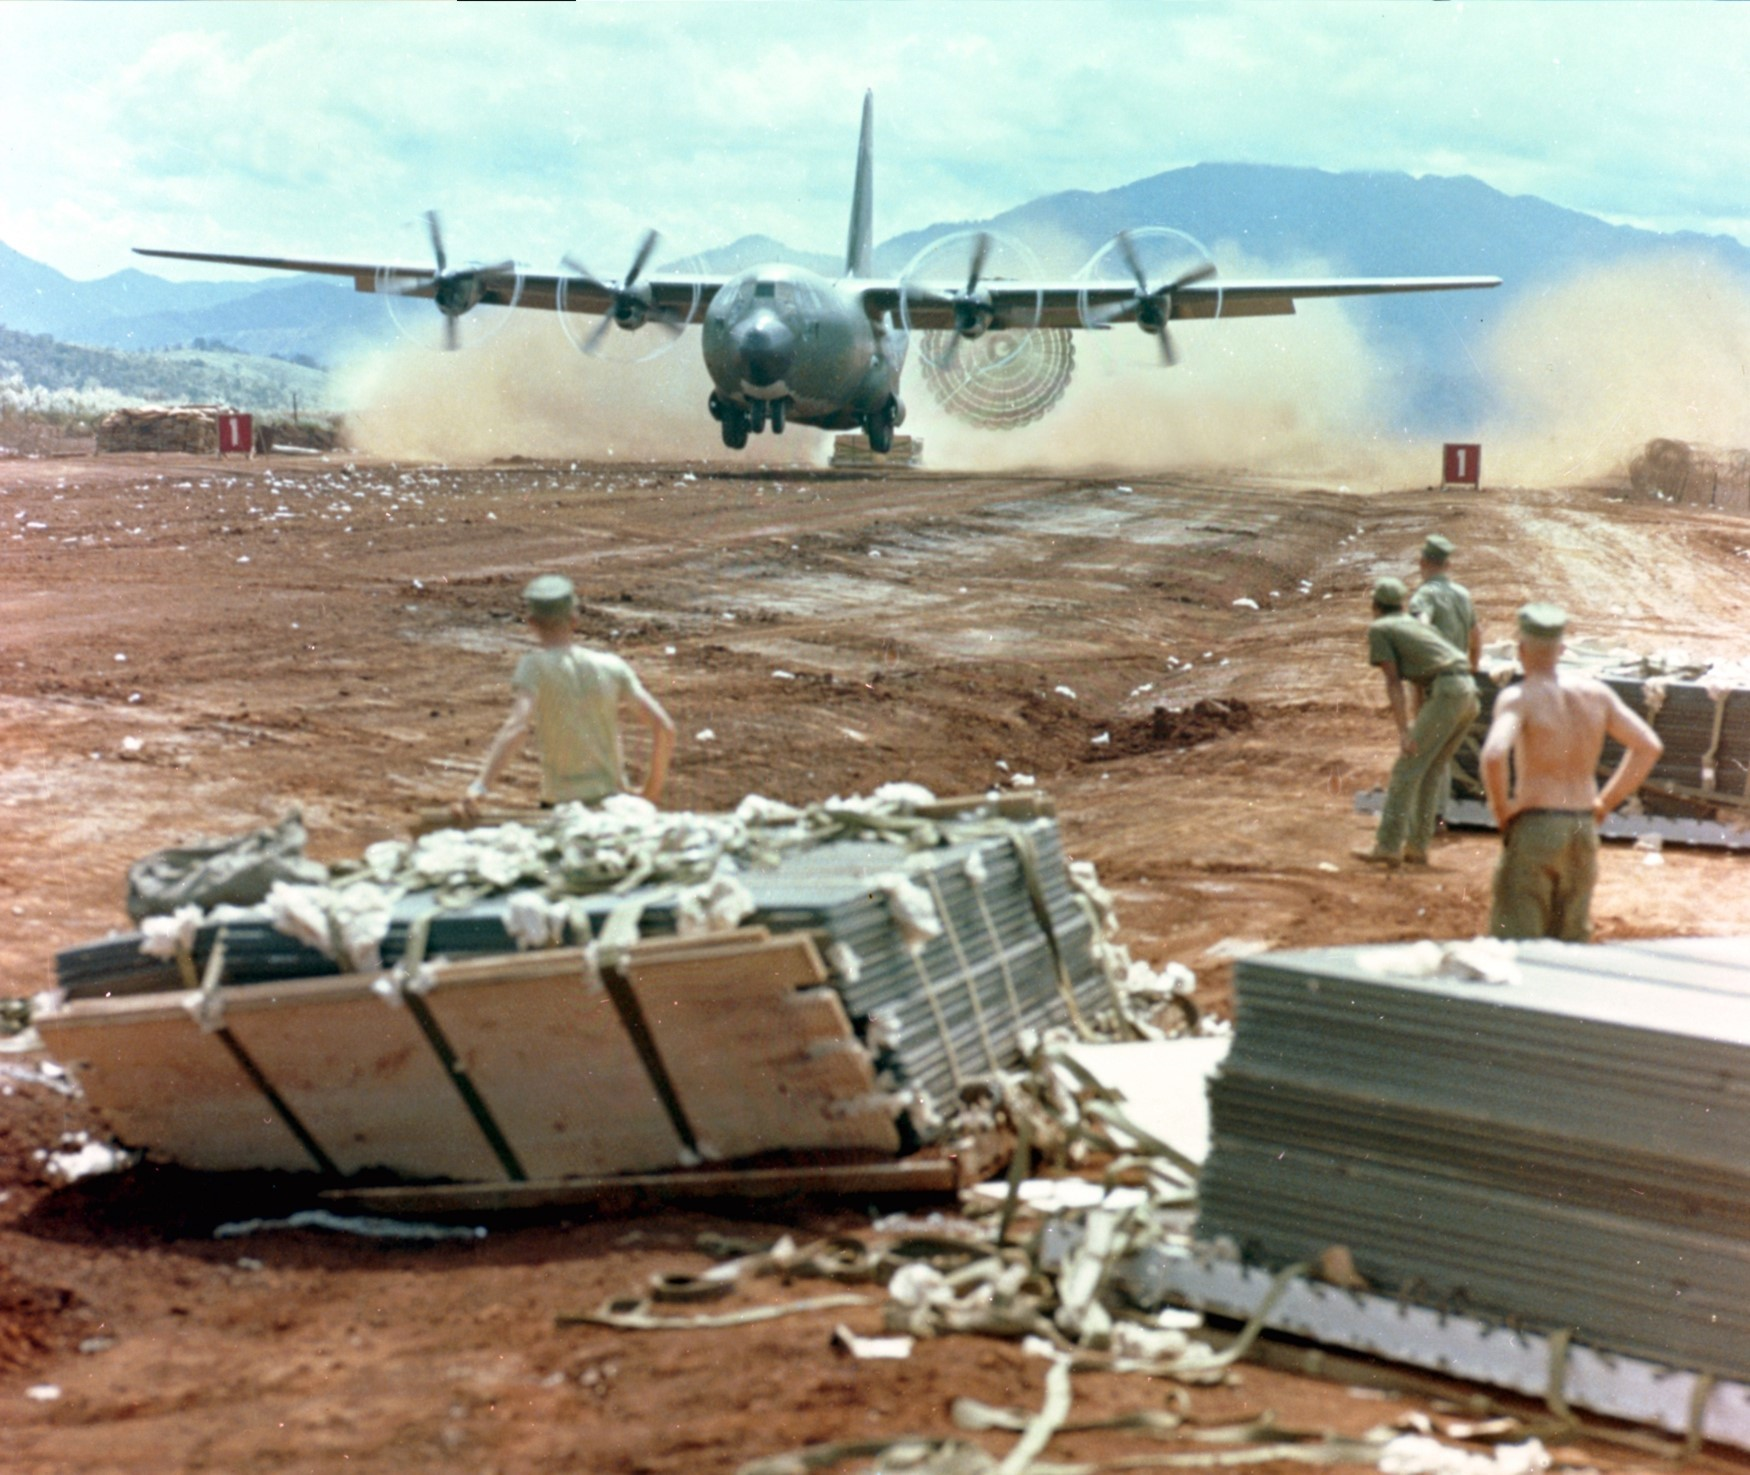 Khe Sanh, South Vietnam, an isolated United States Marine Corps out post during the Vietnam War became too dangerous to land due to hostile ground fire and shelling. To accommodate, C-130s used the Low Altitude Extraction System and kept the Marines resupplied with rations, fuel, ammunition and medical supplies.